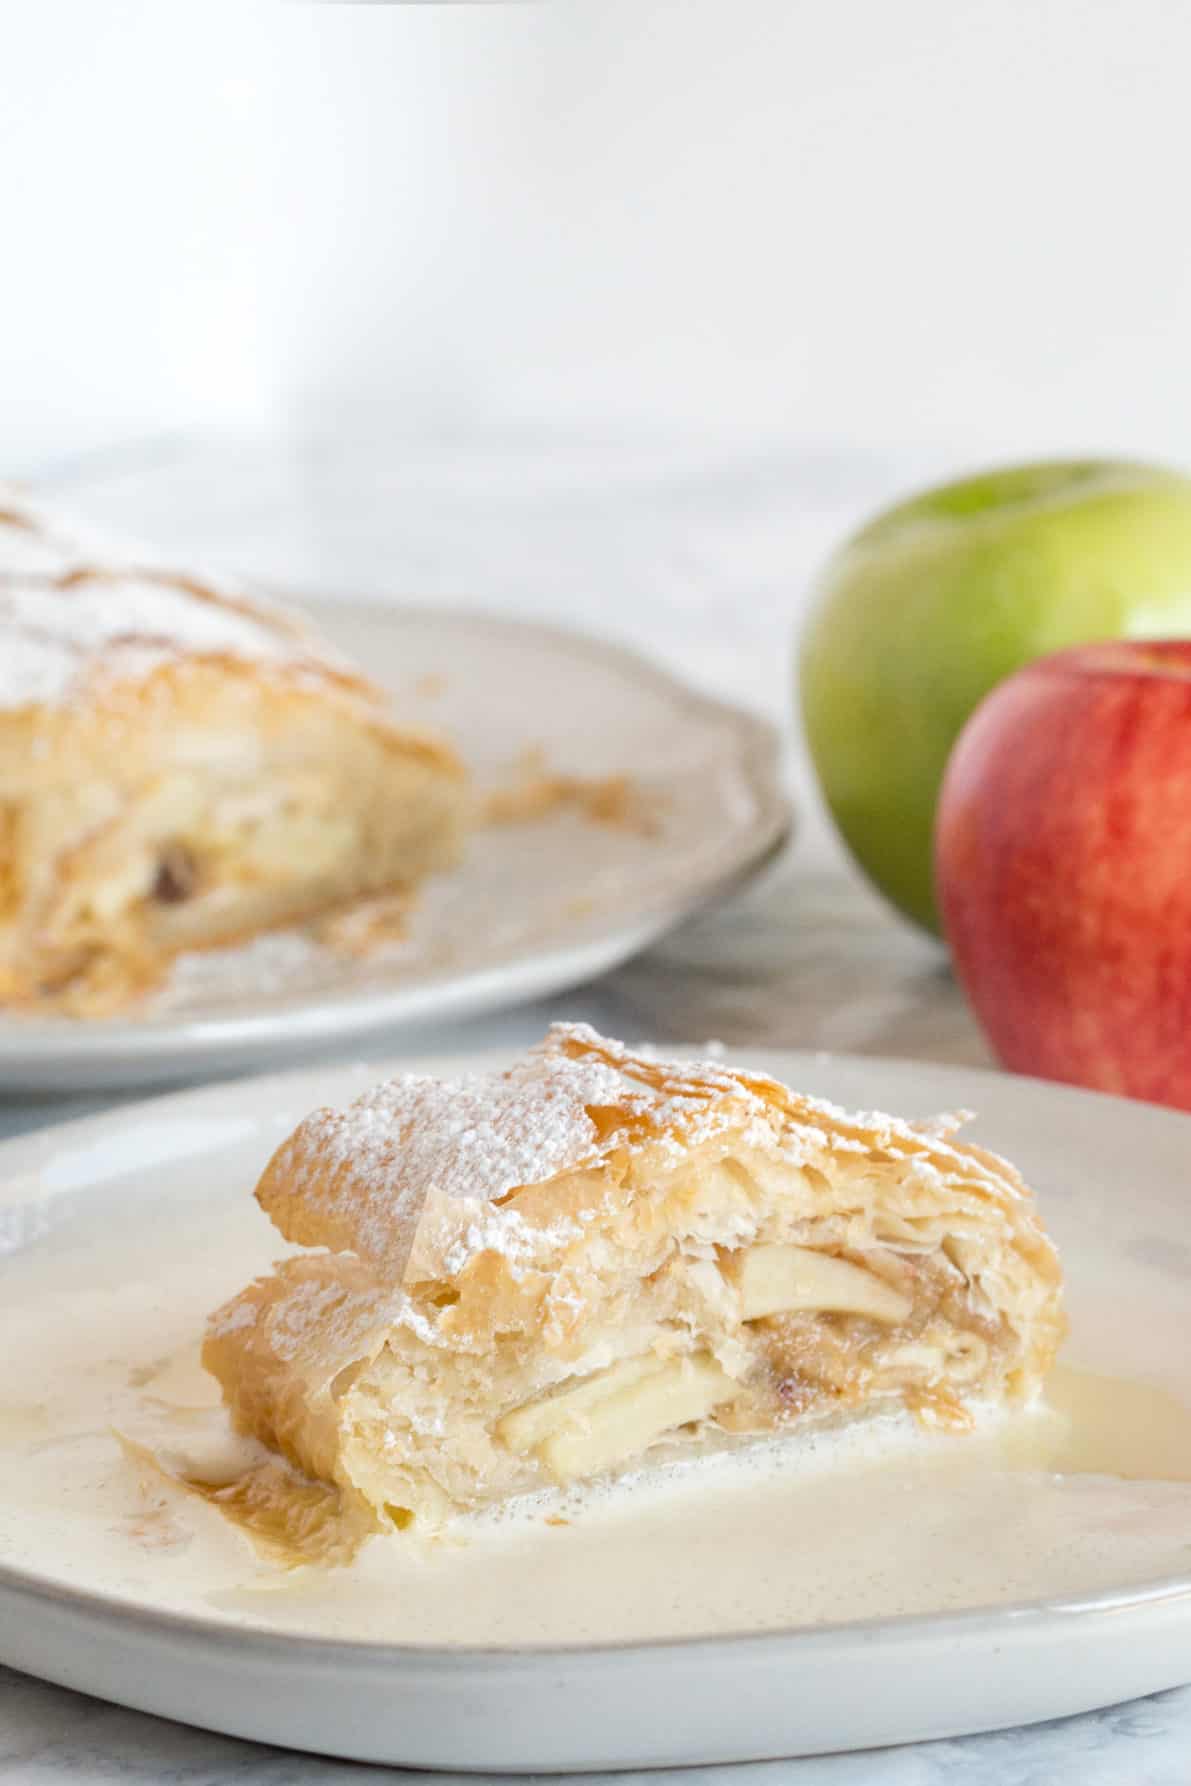 A slice of apple strudel on a white plate.